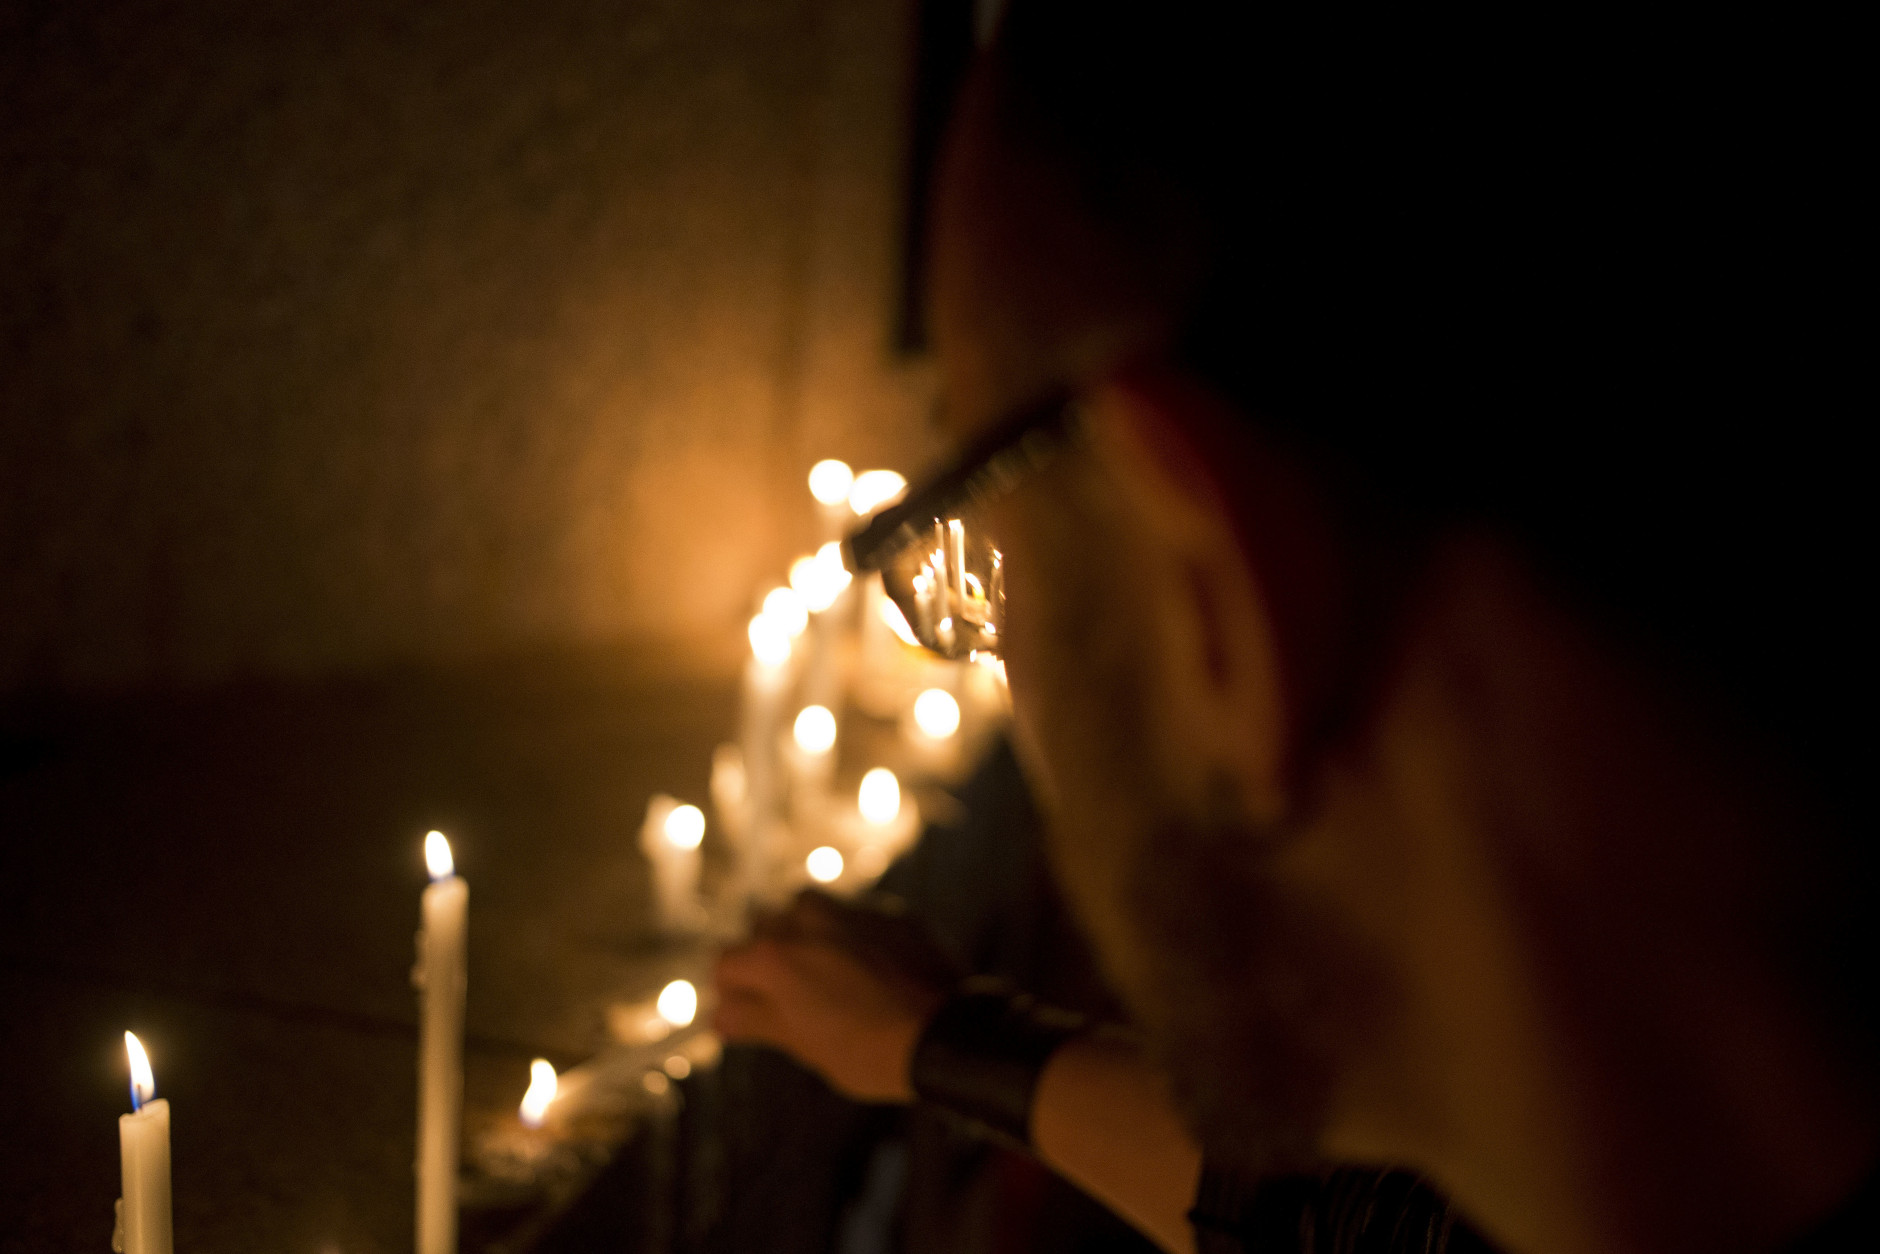 A man lights a light candle during a vigil in front of the U.S. embassy to remember the victims of the mass shooting at the Pulse, Orlando, Fla. nightclub, in Santiago, Chile, Sunday, June 12, 2016. A gunman opened fire inside the nightclub early Sunday, killing at least 50 people before dying in a gunfight with SWAT officers, police said. (AP Photo/Esteban Felix)